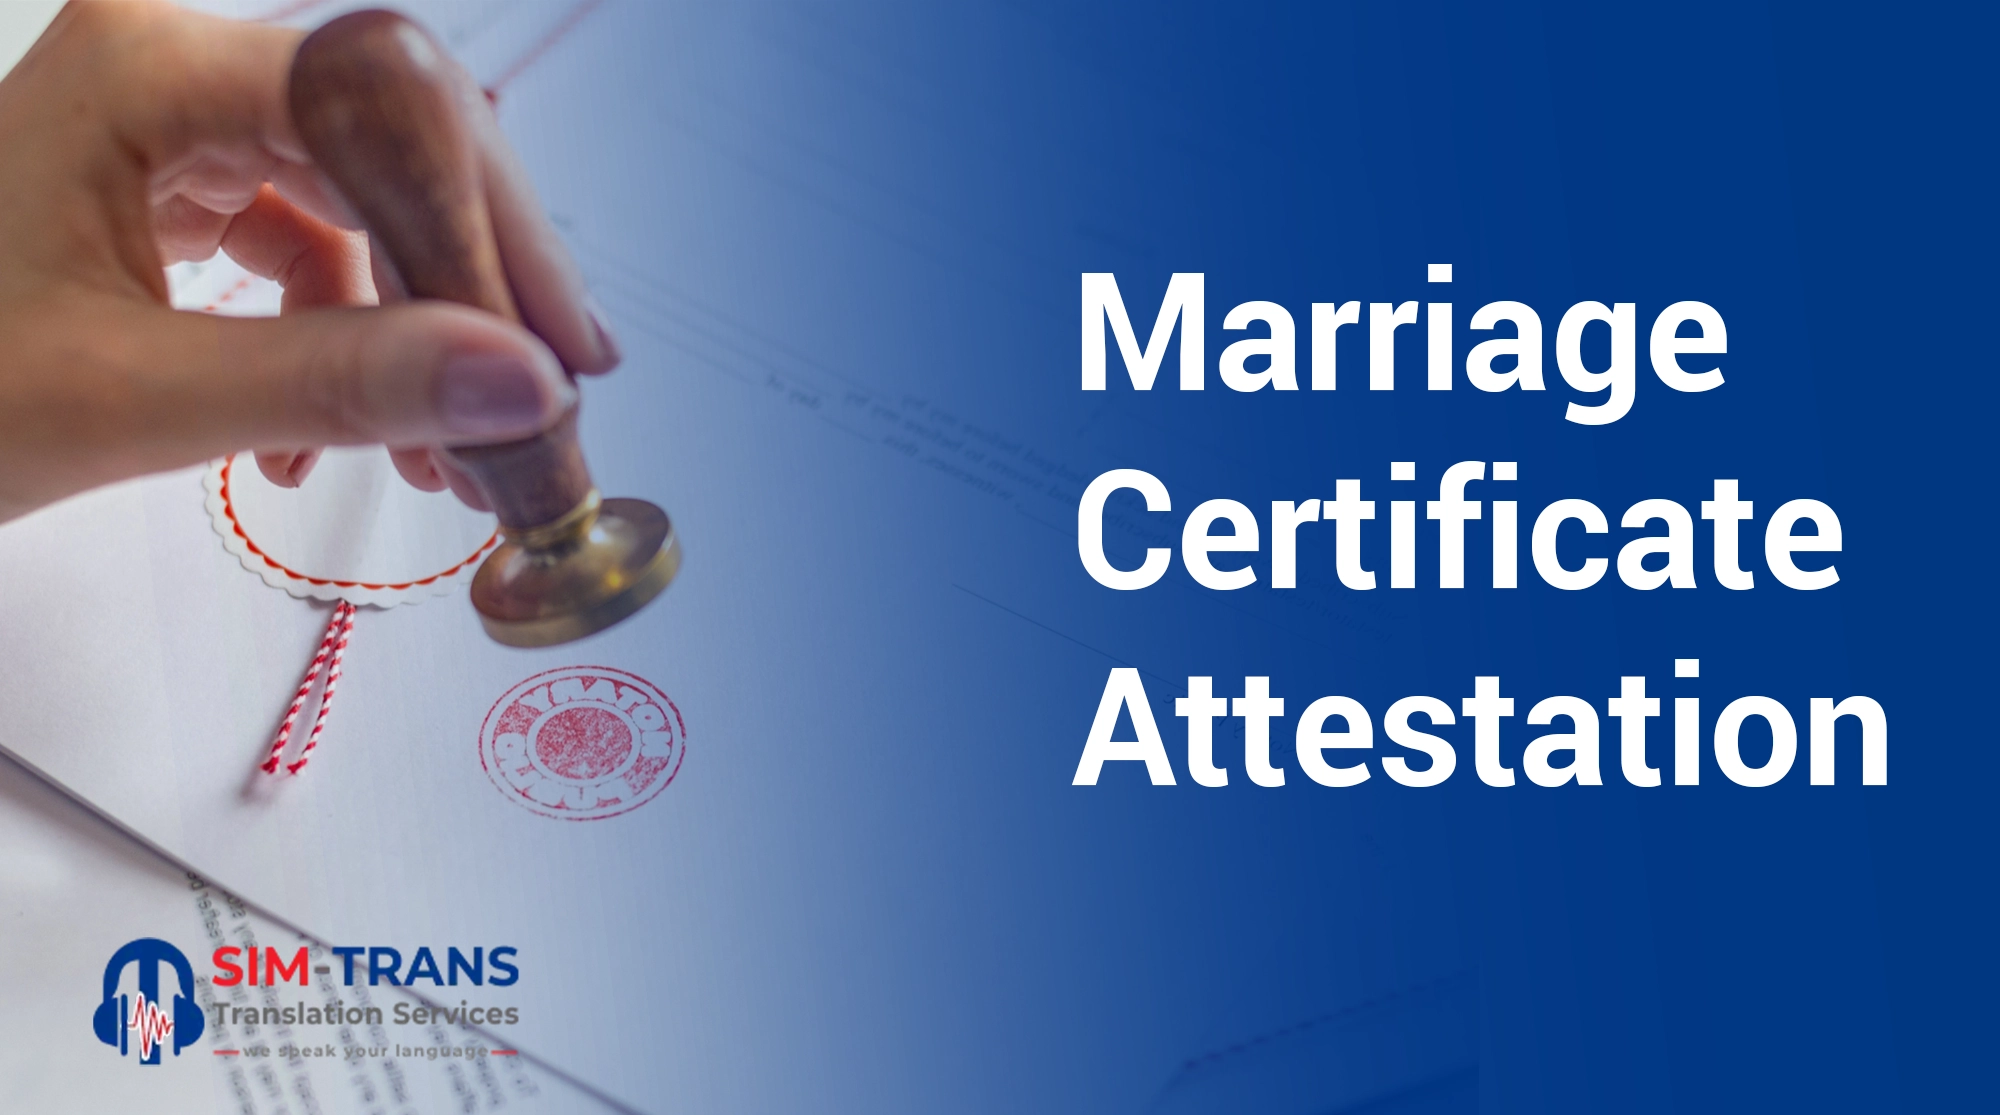 Important Information About Marriage Certificate Attestation In UAE